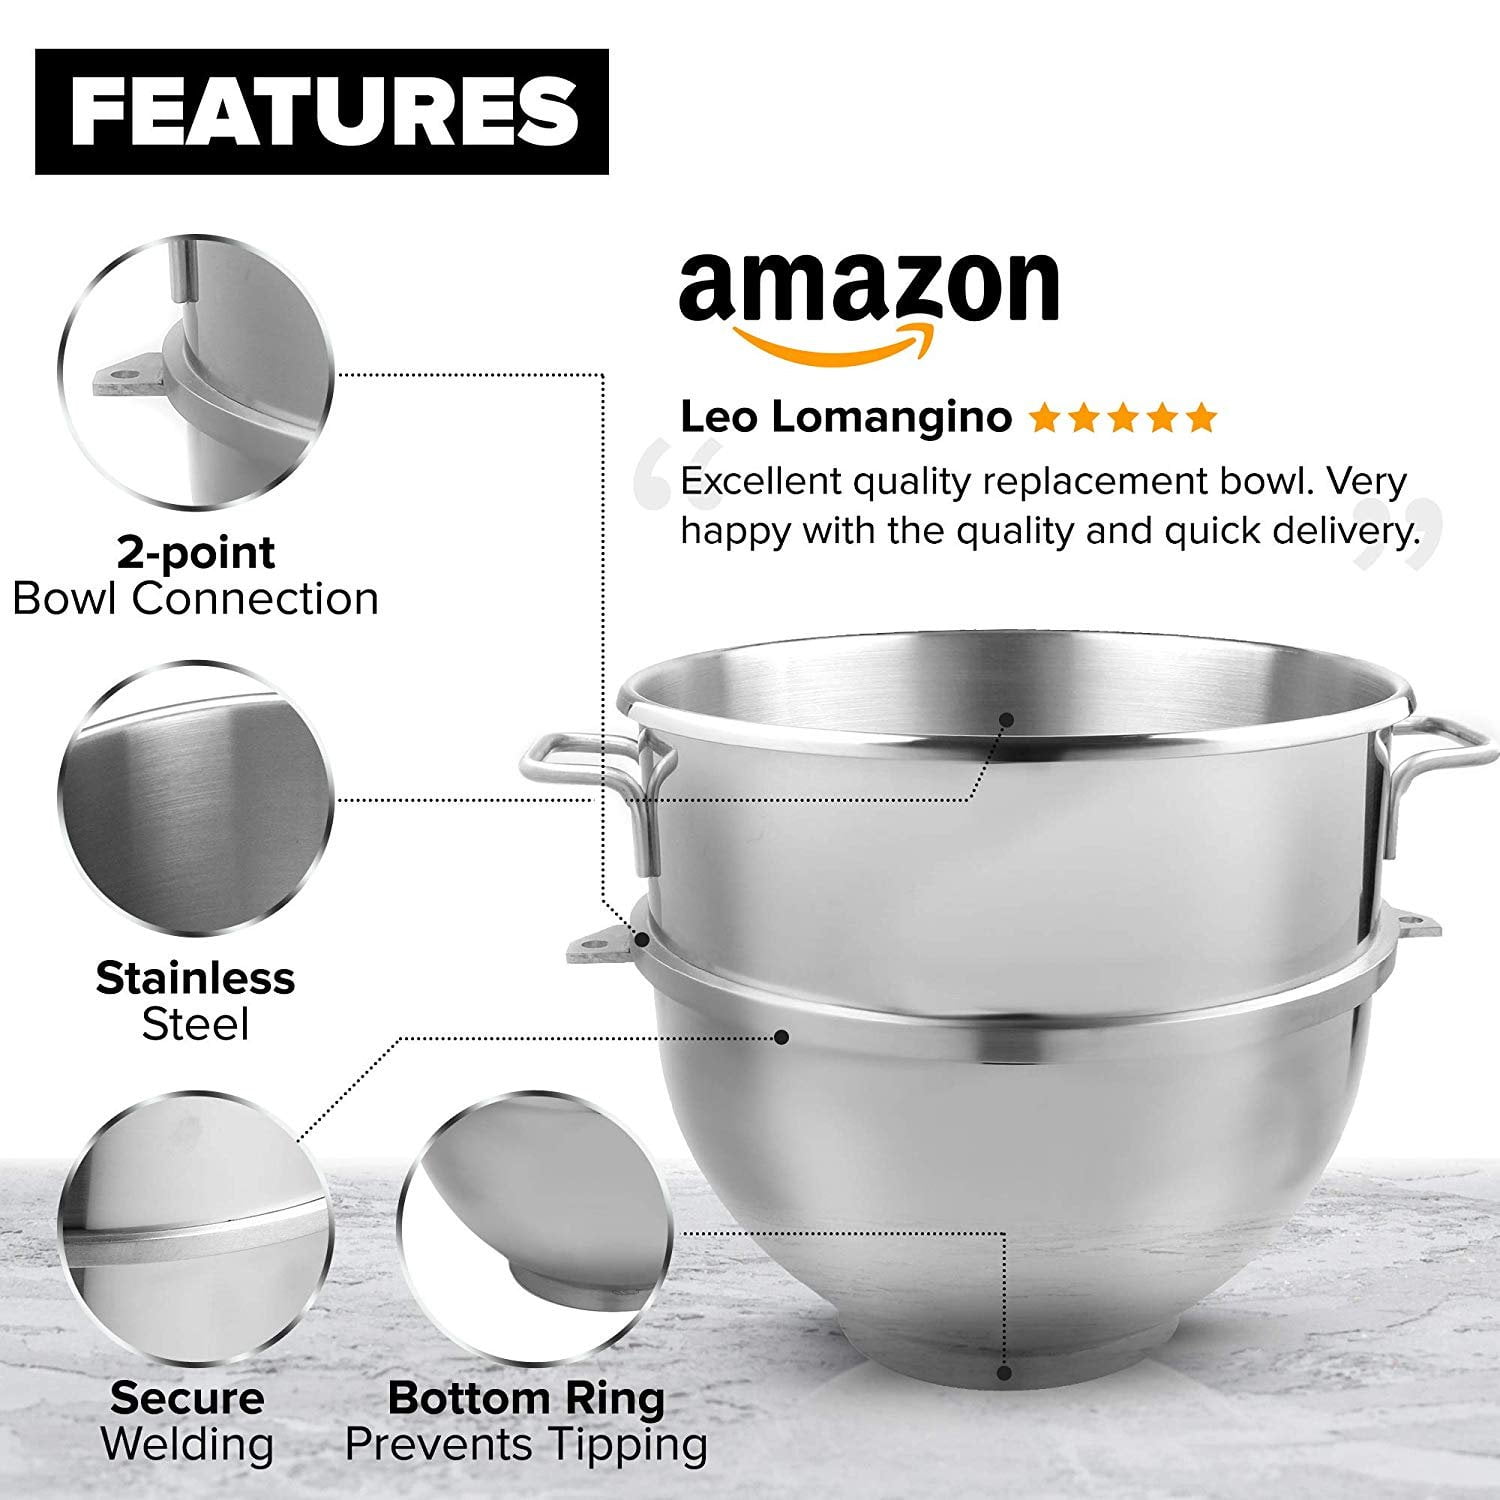 60 QUART LARGE STAINLESS STEEL MIXING BOWL FITS HOBART HEAVY DUTY 60QT MIXERS